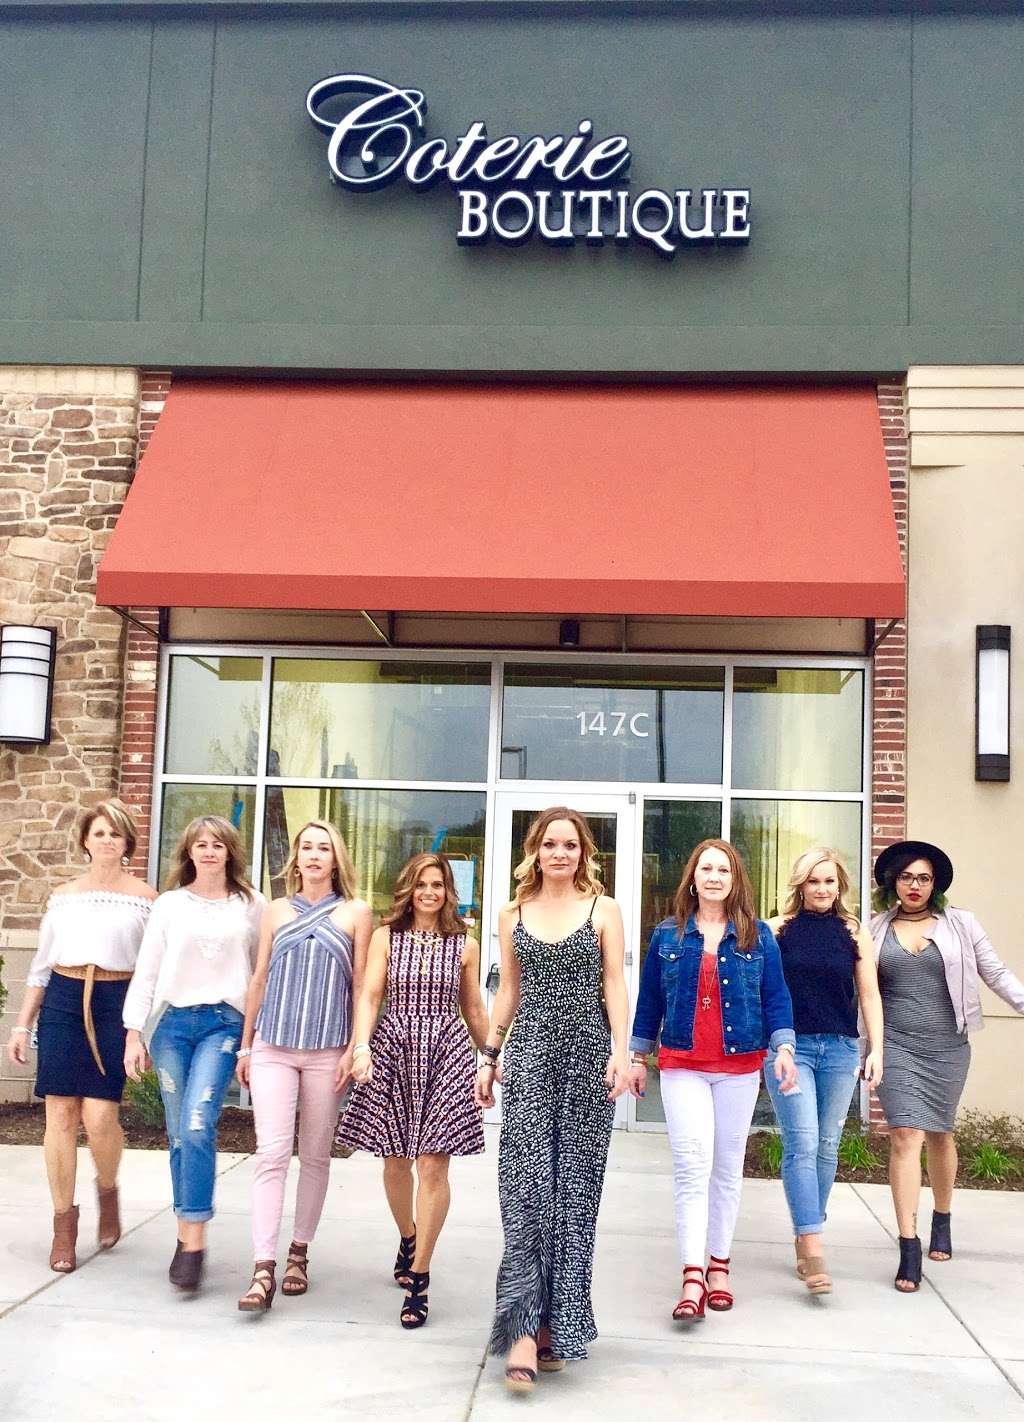 Coterie, a Boutique | 147 C Ritchie Highway, Severna Park, MD 21146, USA | Phone: (410) 431-7200